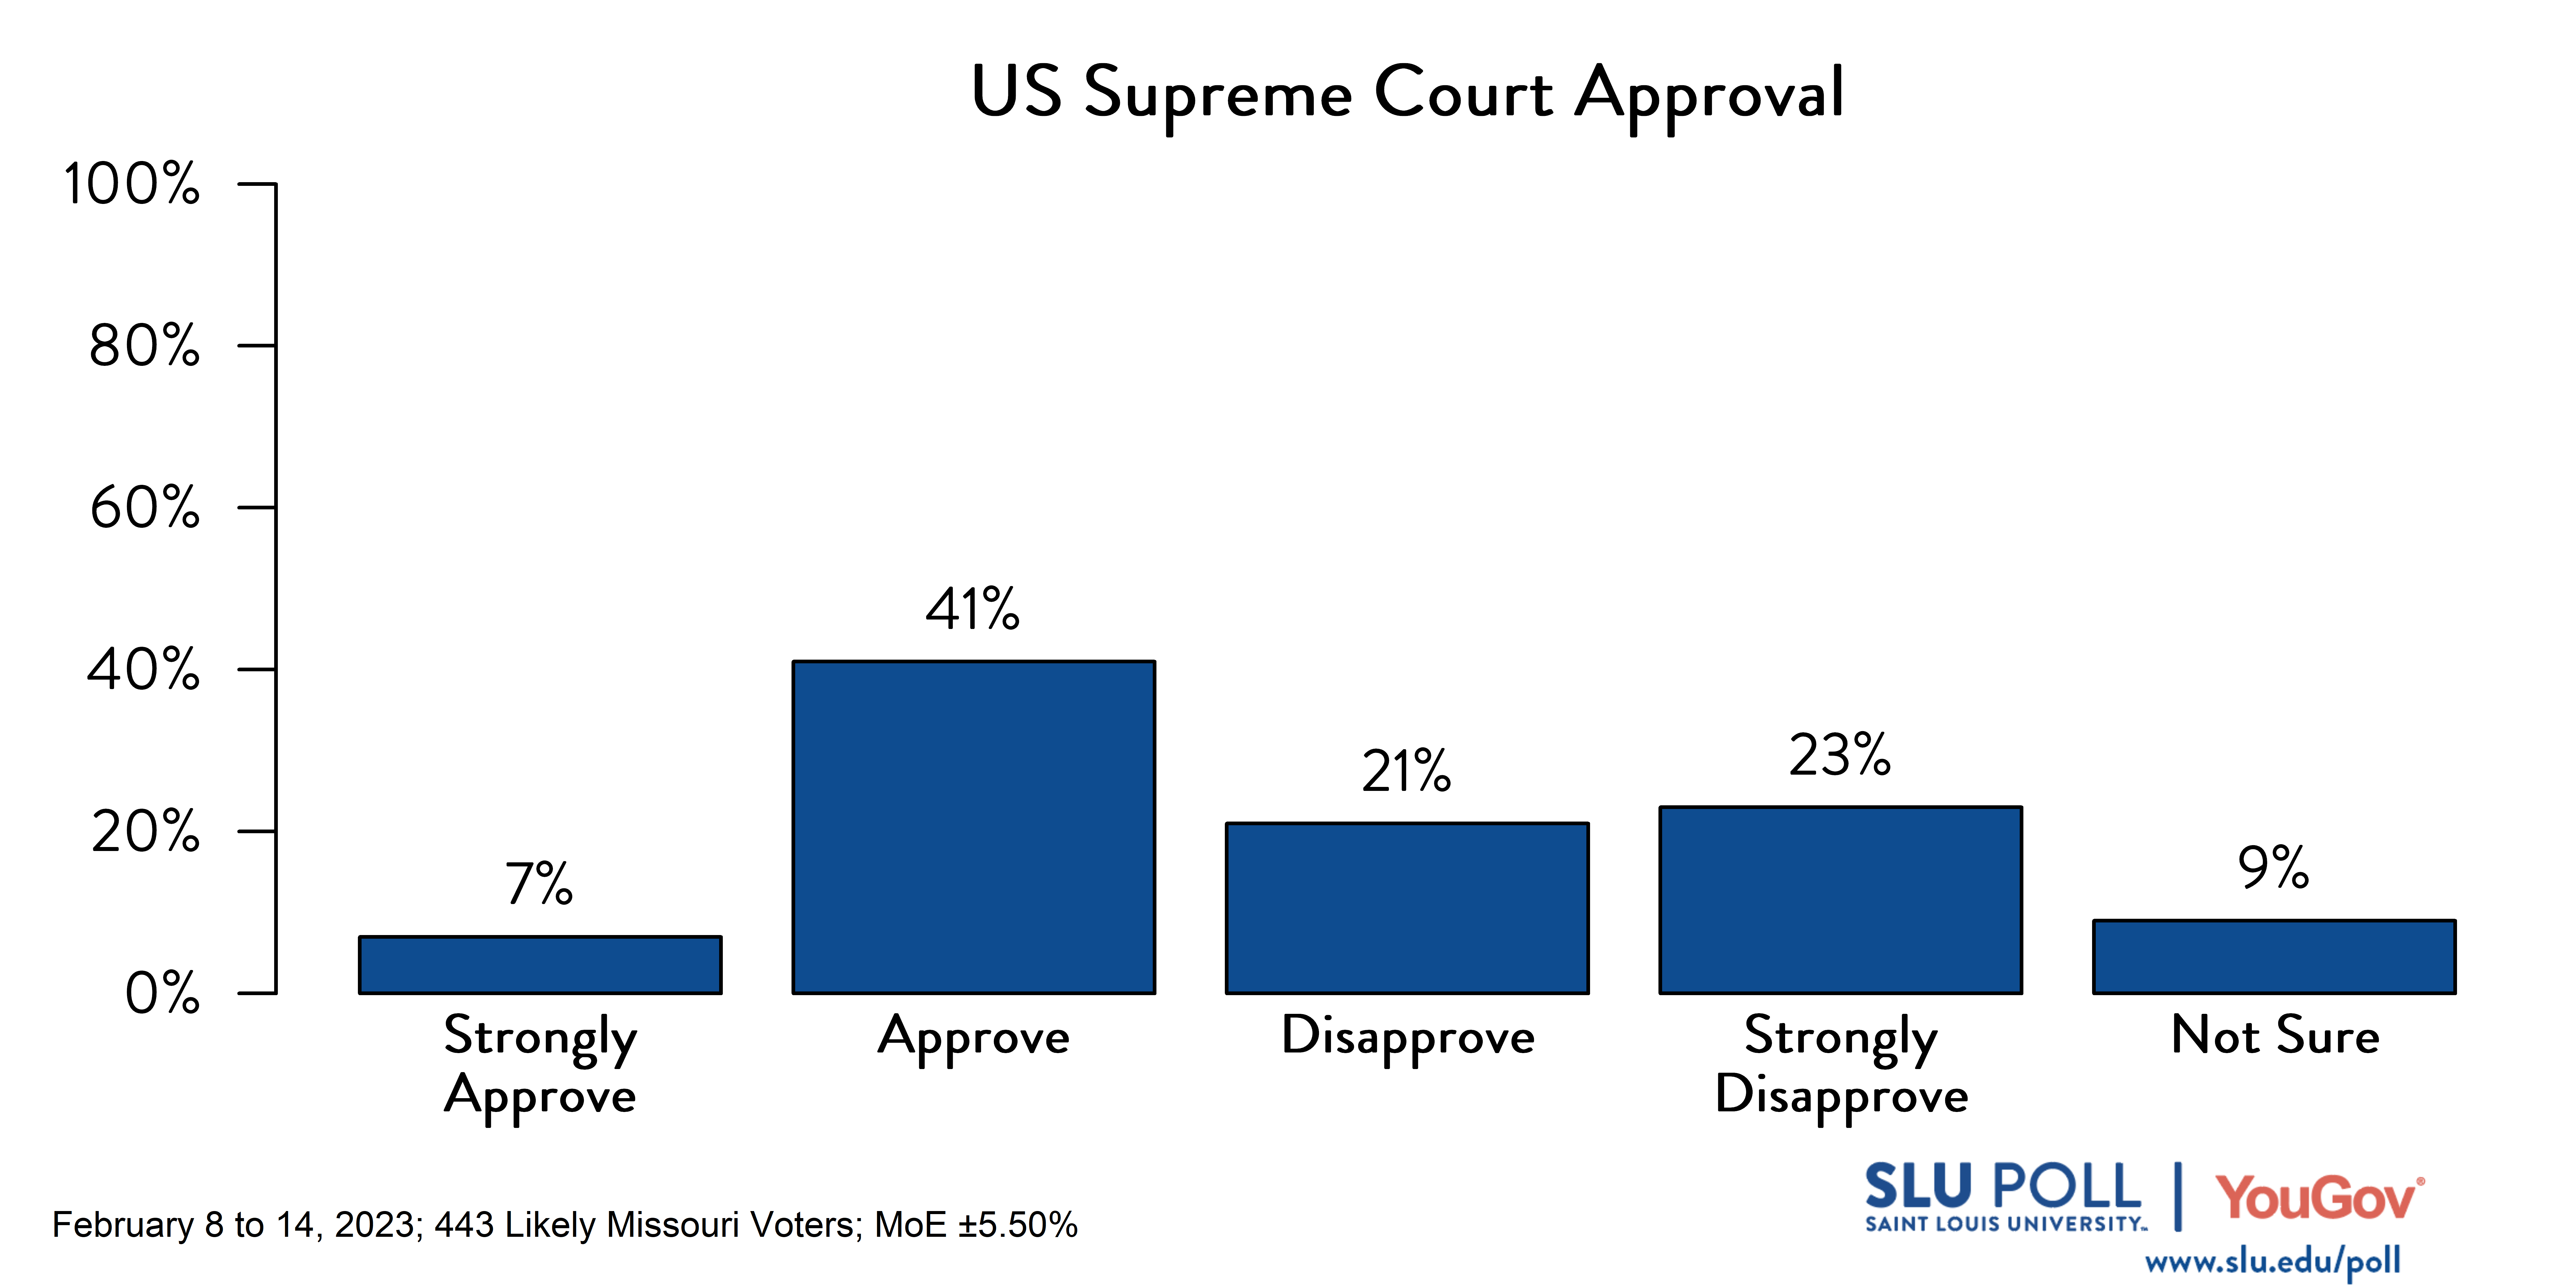 Likely voters' responses to 'Do you approve or disapprove of the way each is doing their job: The US Supreme Court?': 7% Strongly approve, 41% Approve, 21% Disapprove, 23% Strongly disapprove, and 9% Not sure.